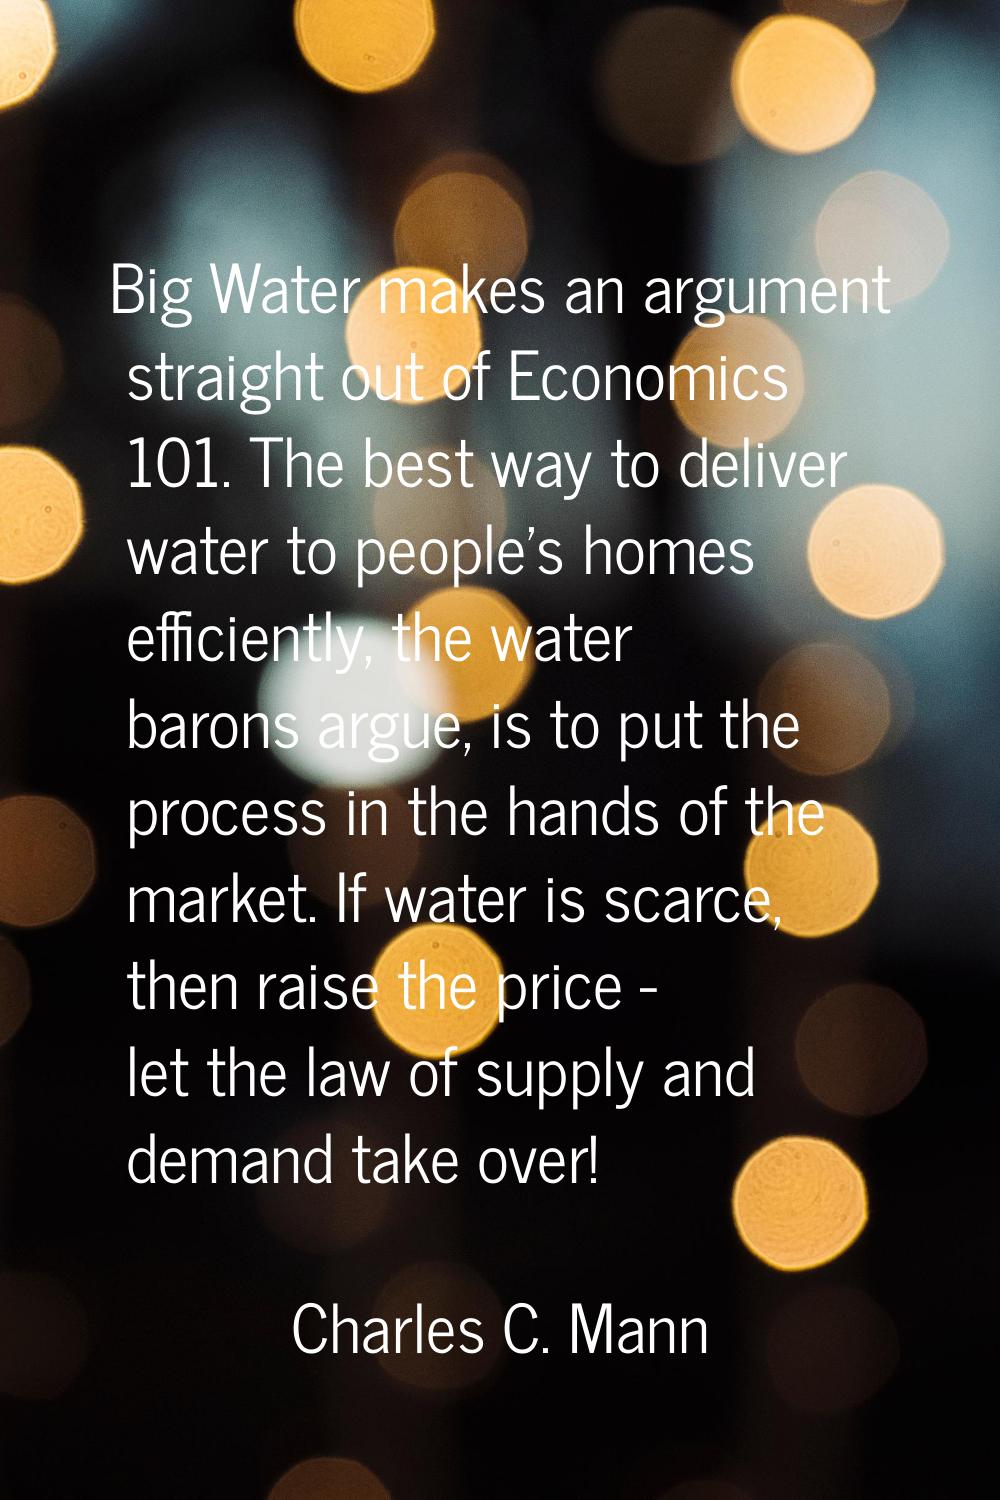 Big Water makes an argument straight out of Economics 101. The best way to deliver water to people'